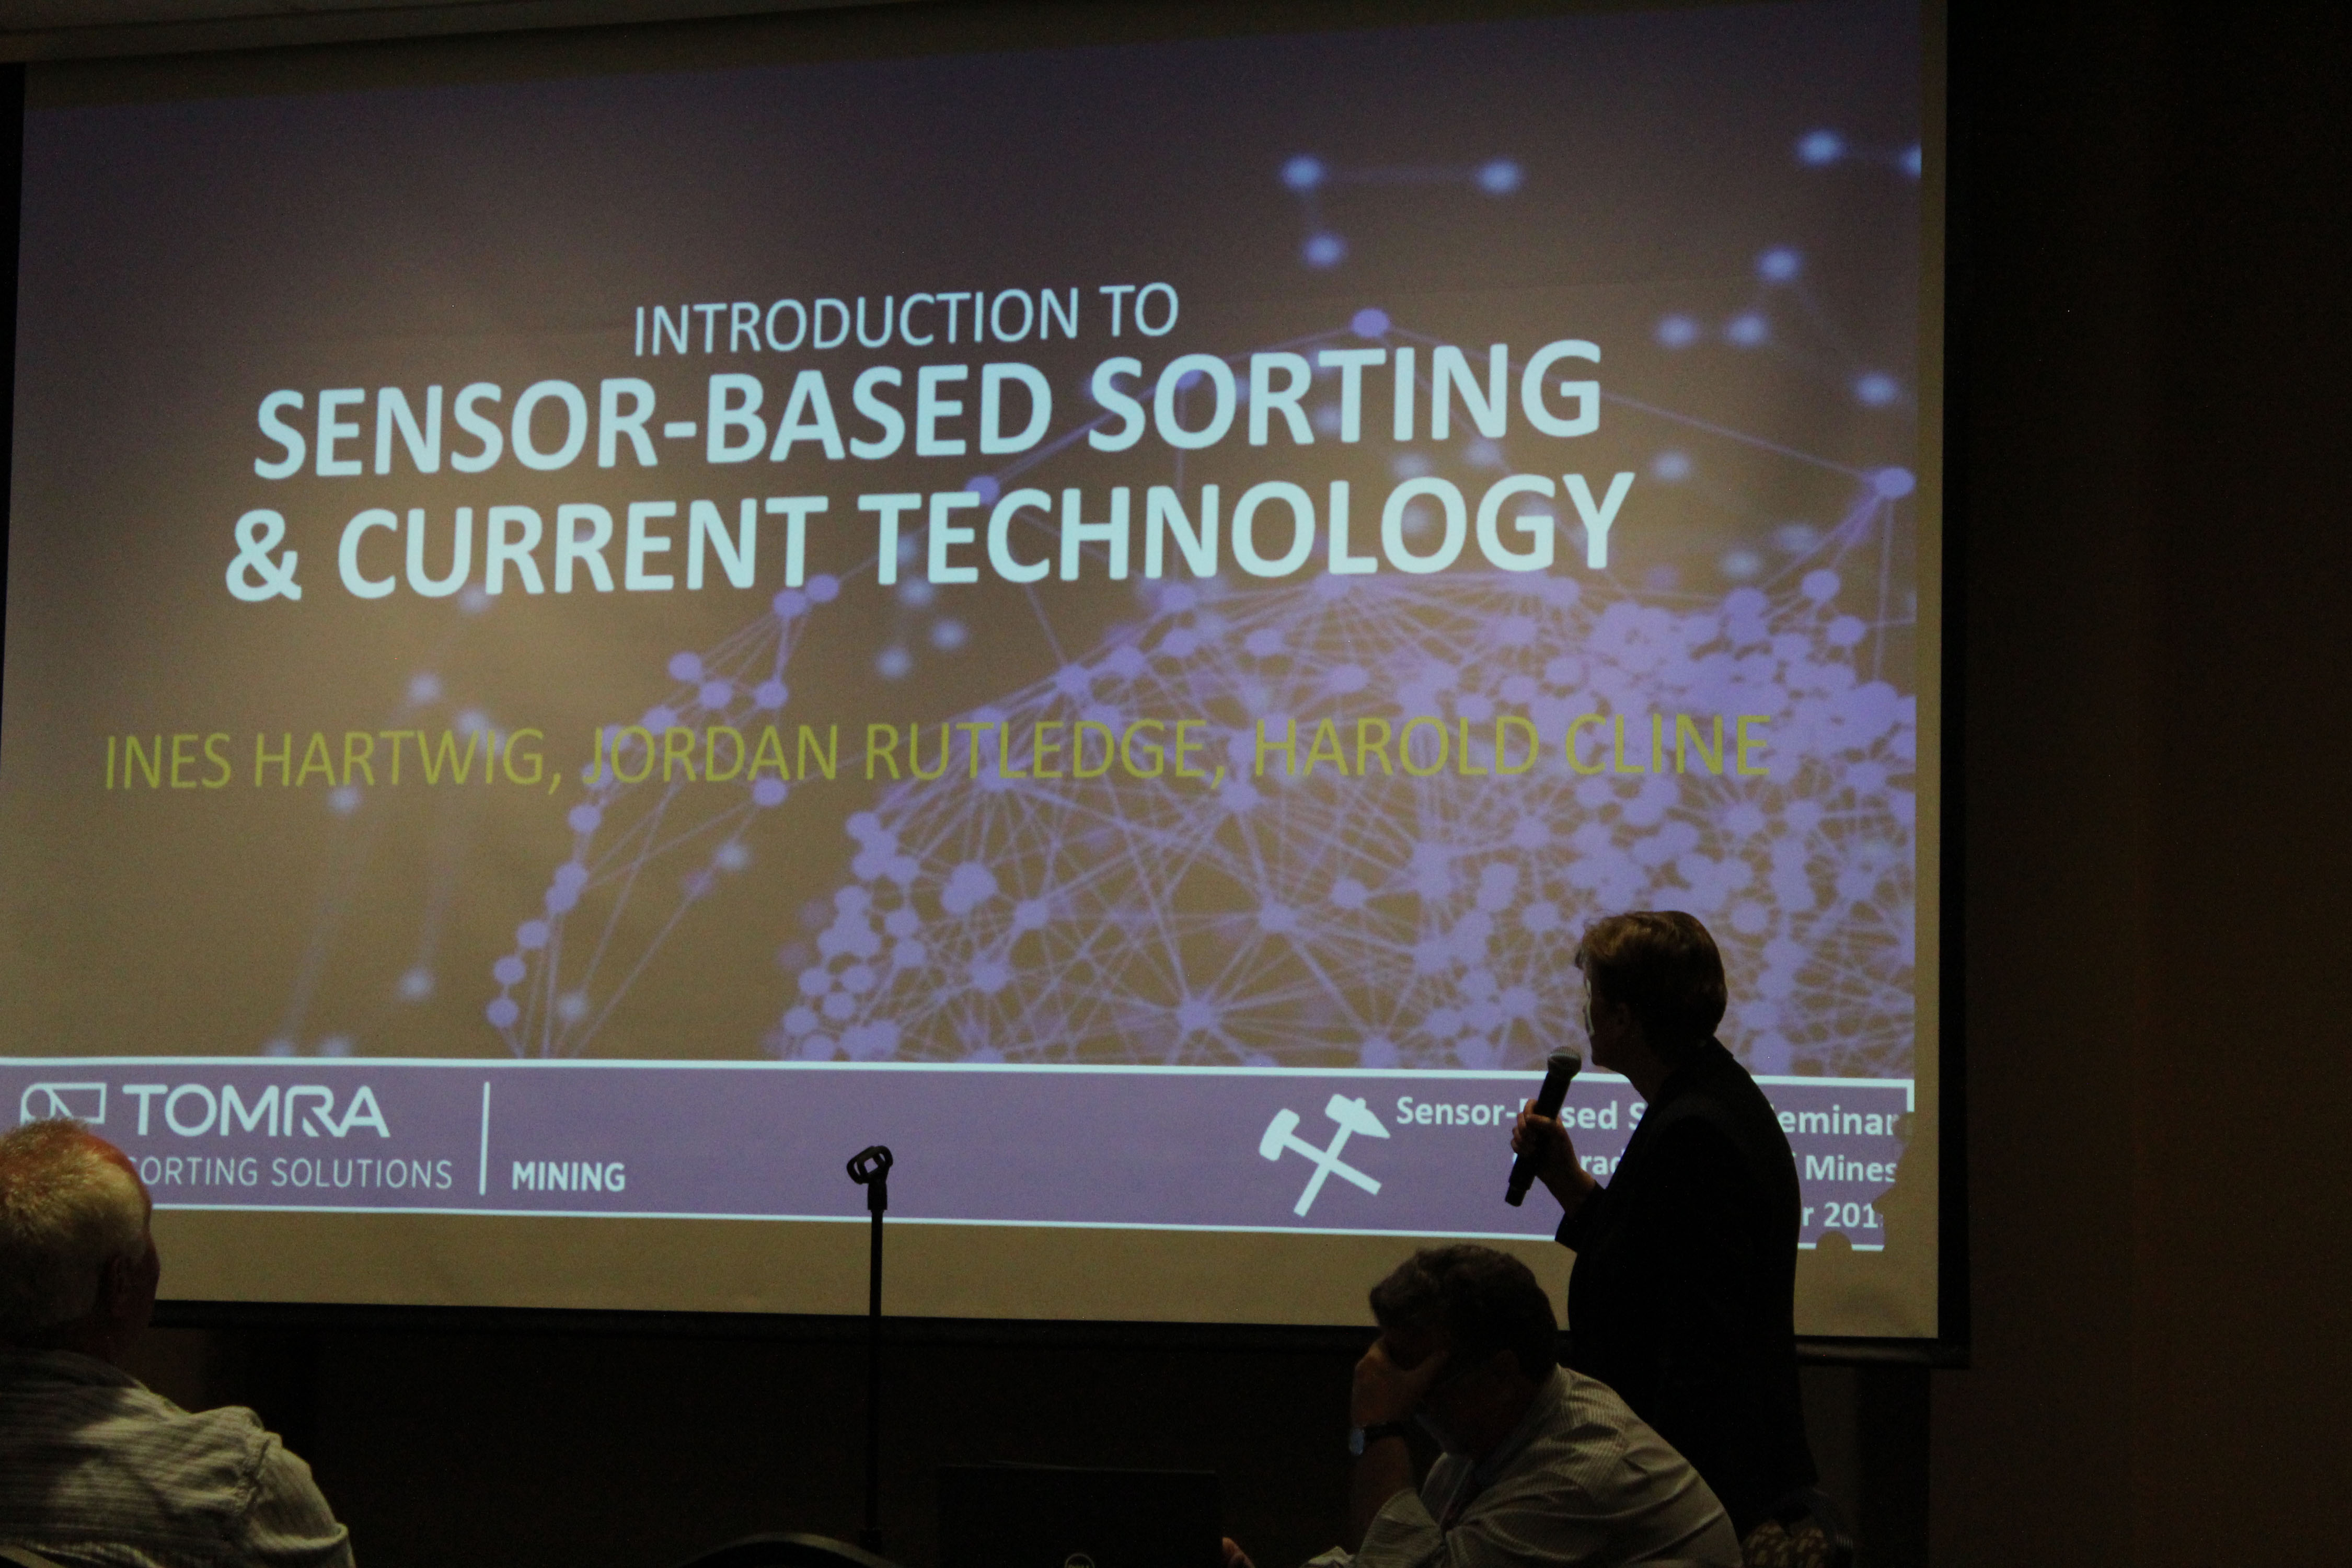 TOMRA HOLDS FIRST-OF-ITS-KIND SEMINAR ON SENSOR-BASED SORTING WITH RESOUNDING SUCCESS